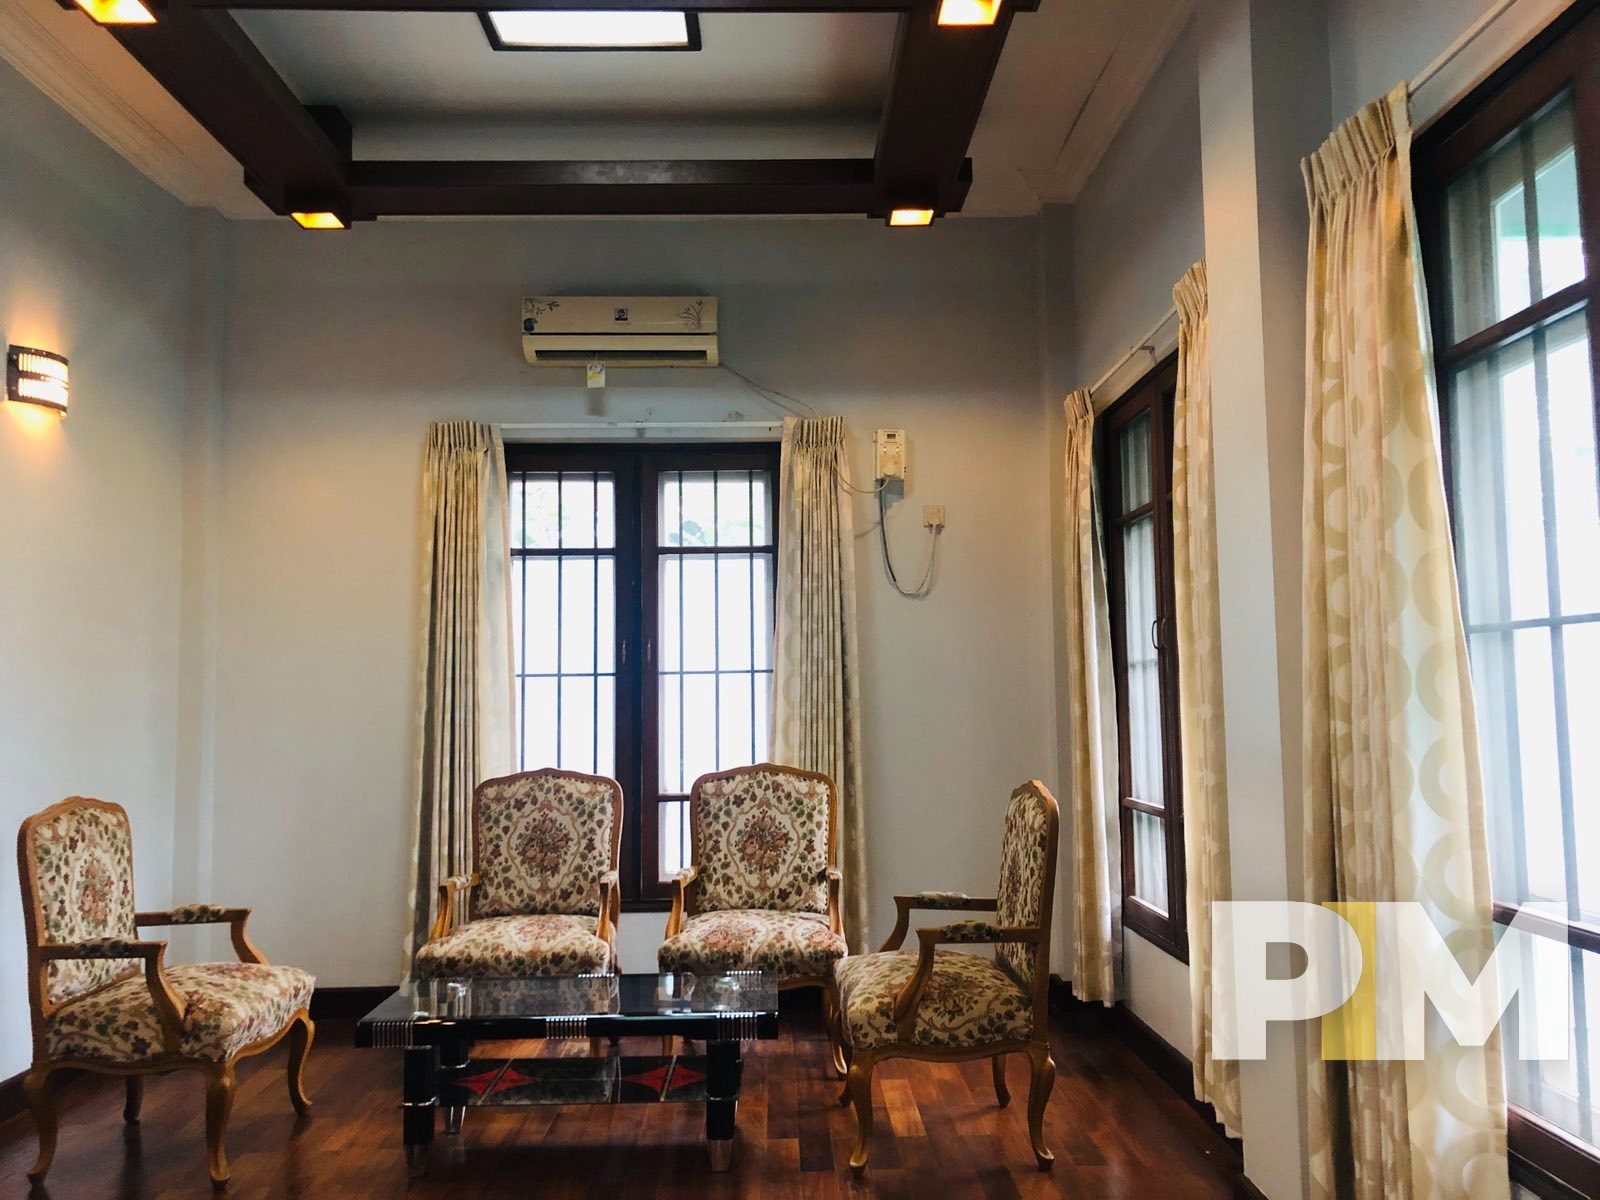 living room with coffee table - Yangon Real Estate